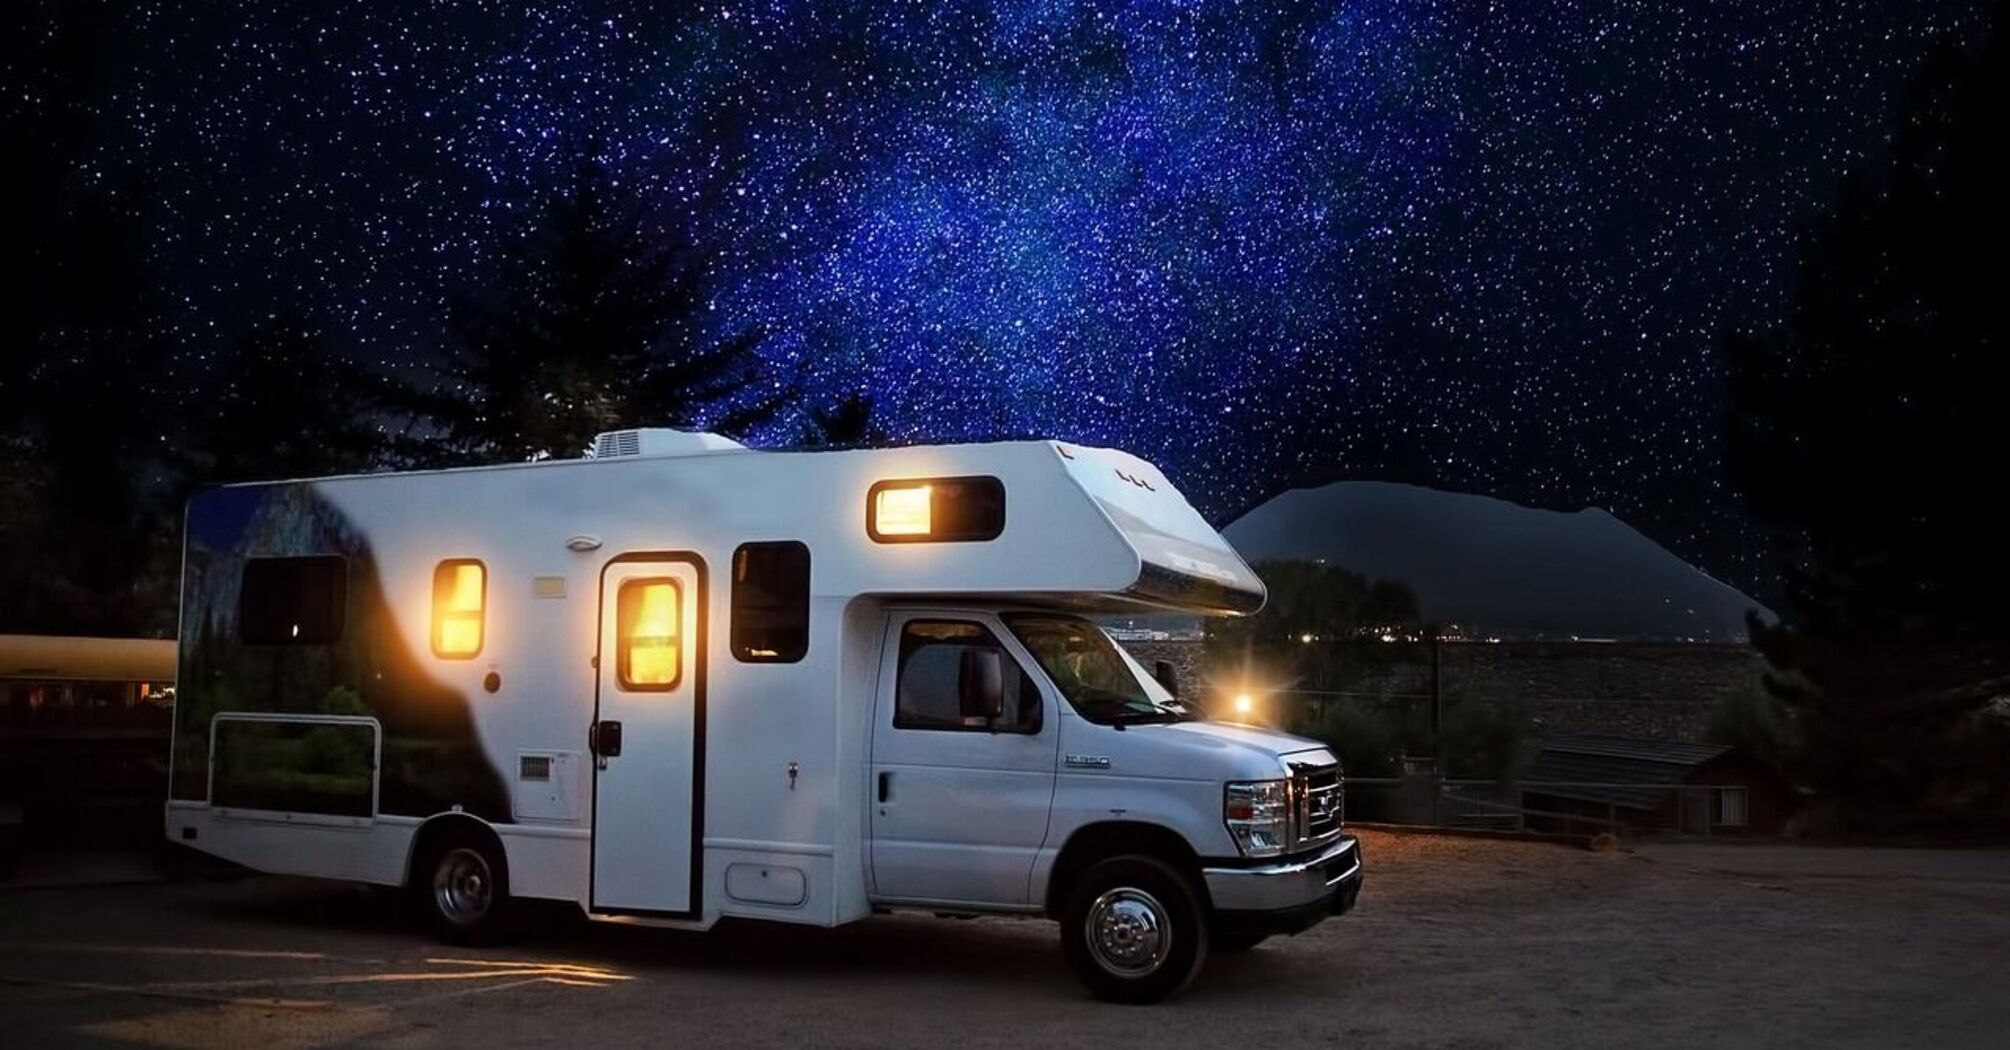 10 best campsites and RV parks near Las Vegas. City and suburban options